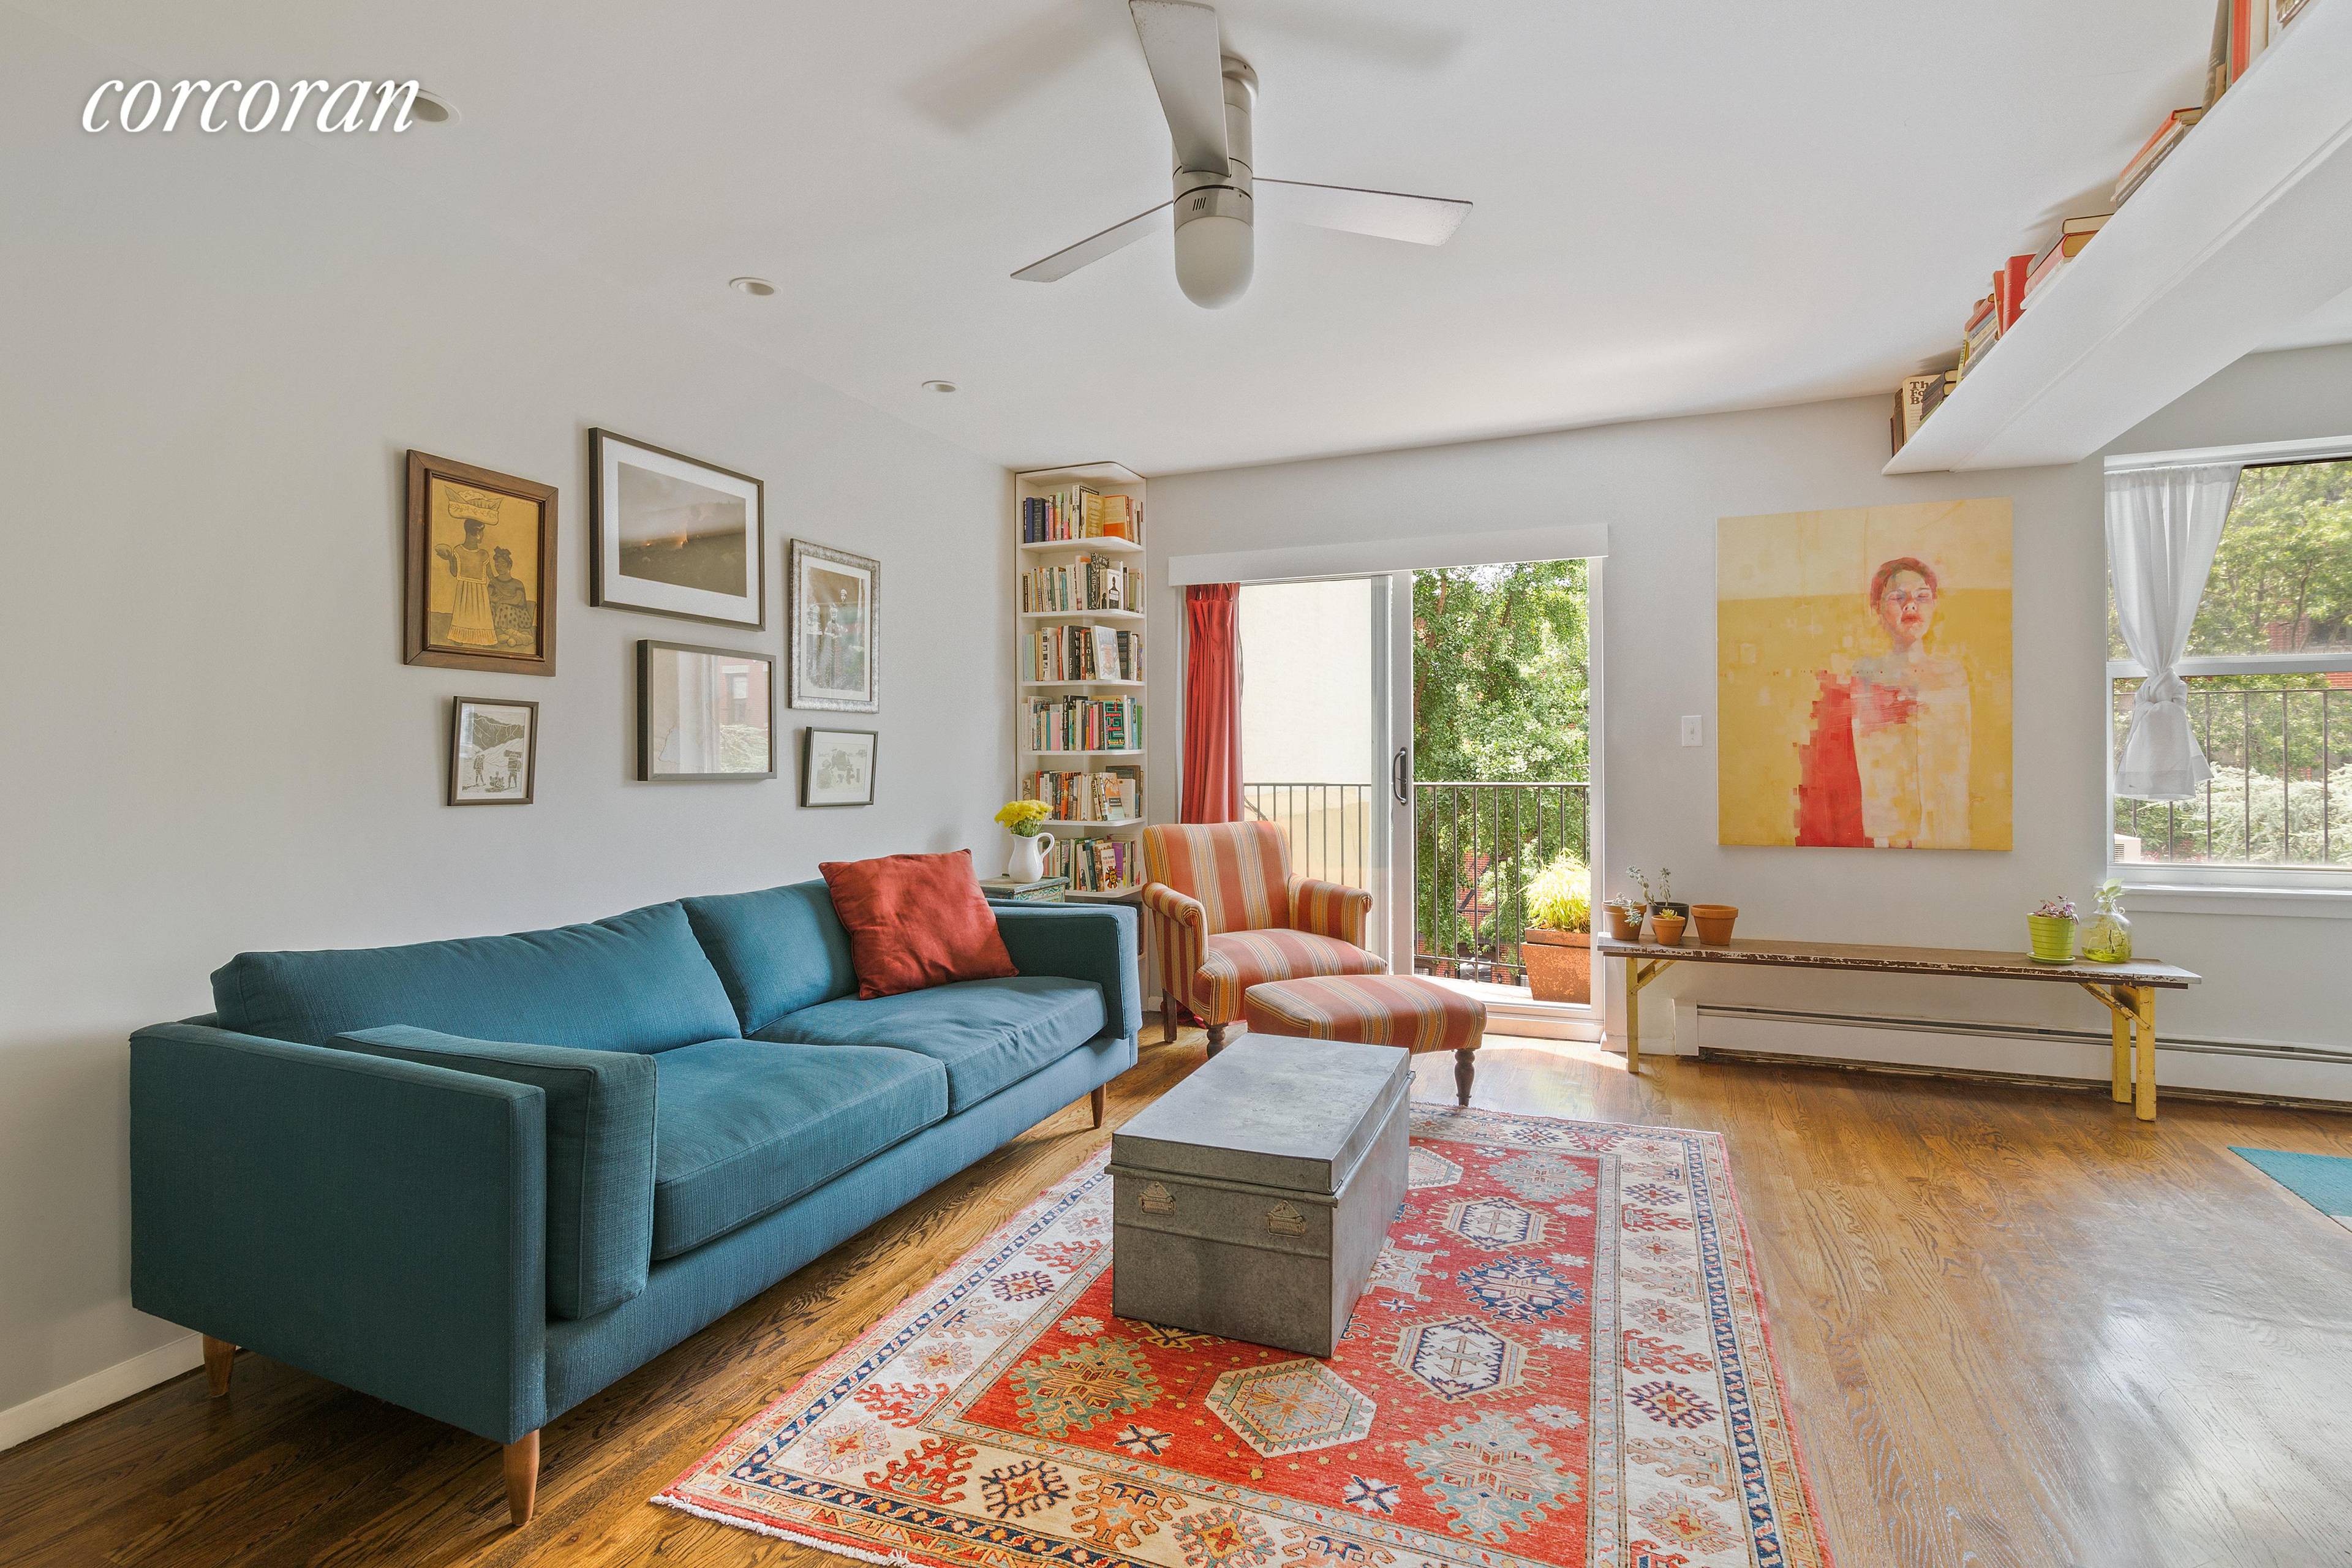 This 2 bed 1 bath duplex coop apartment is the epitome Boerum Hill living.